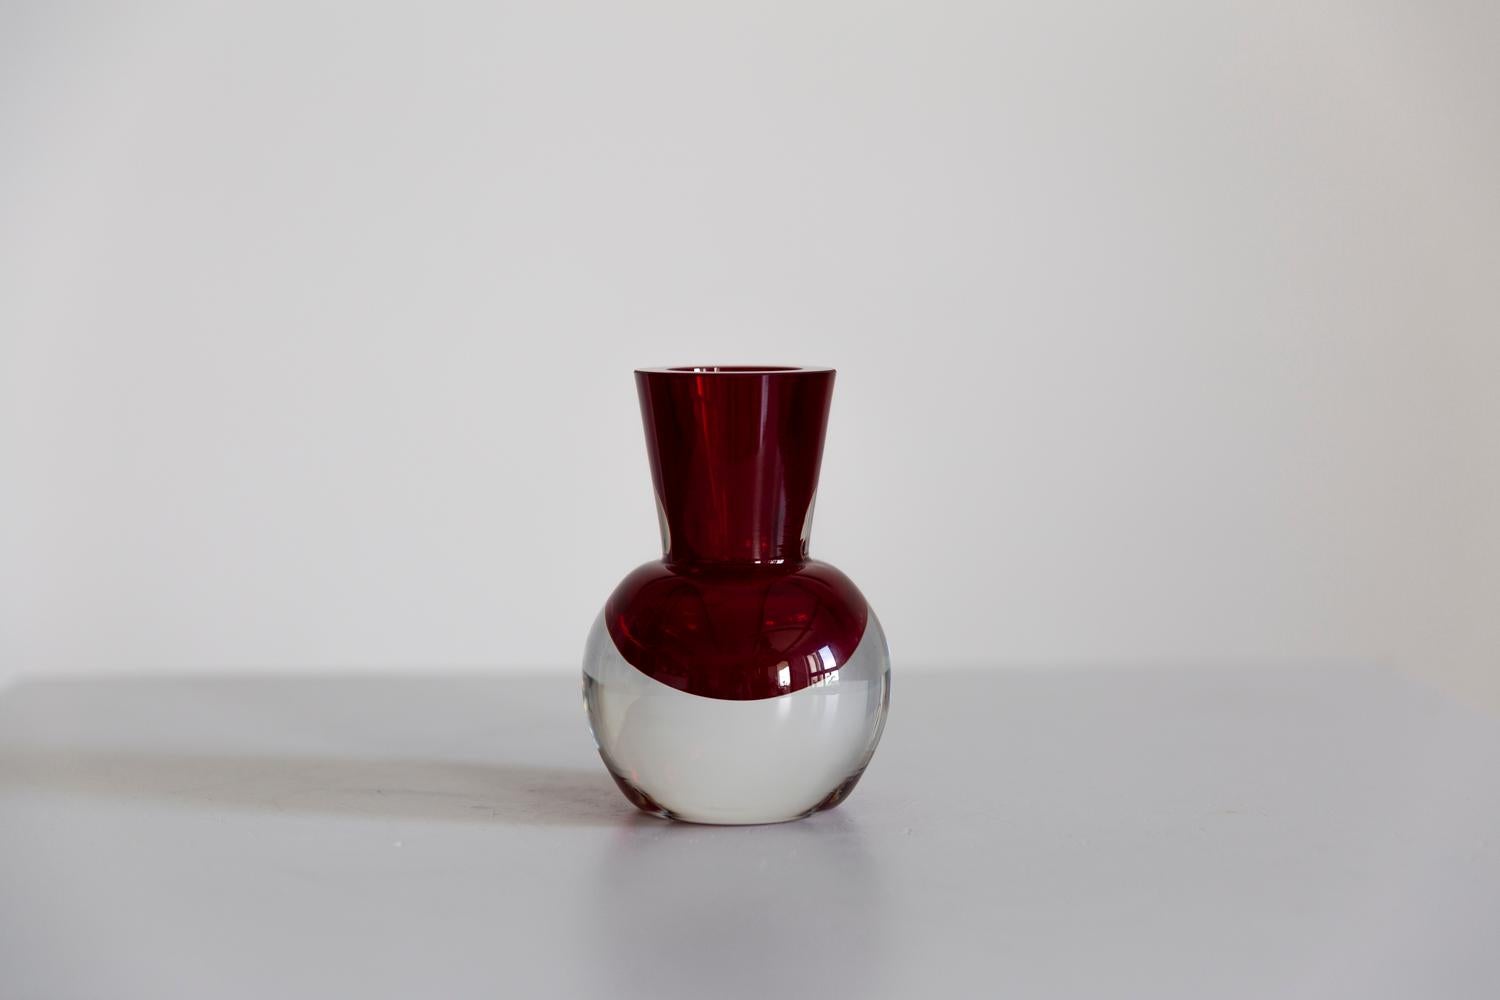 Midcentury Vintage Small Red Decorative Glass Vase, Europe, 1960s For Sale 5